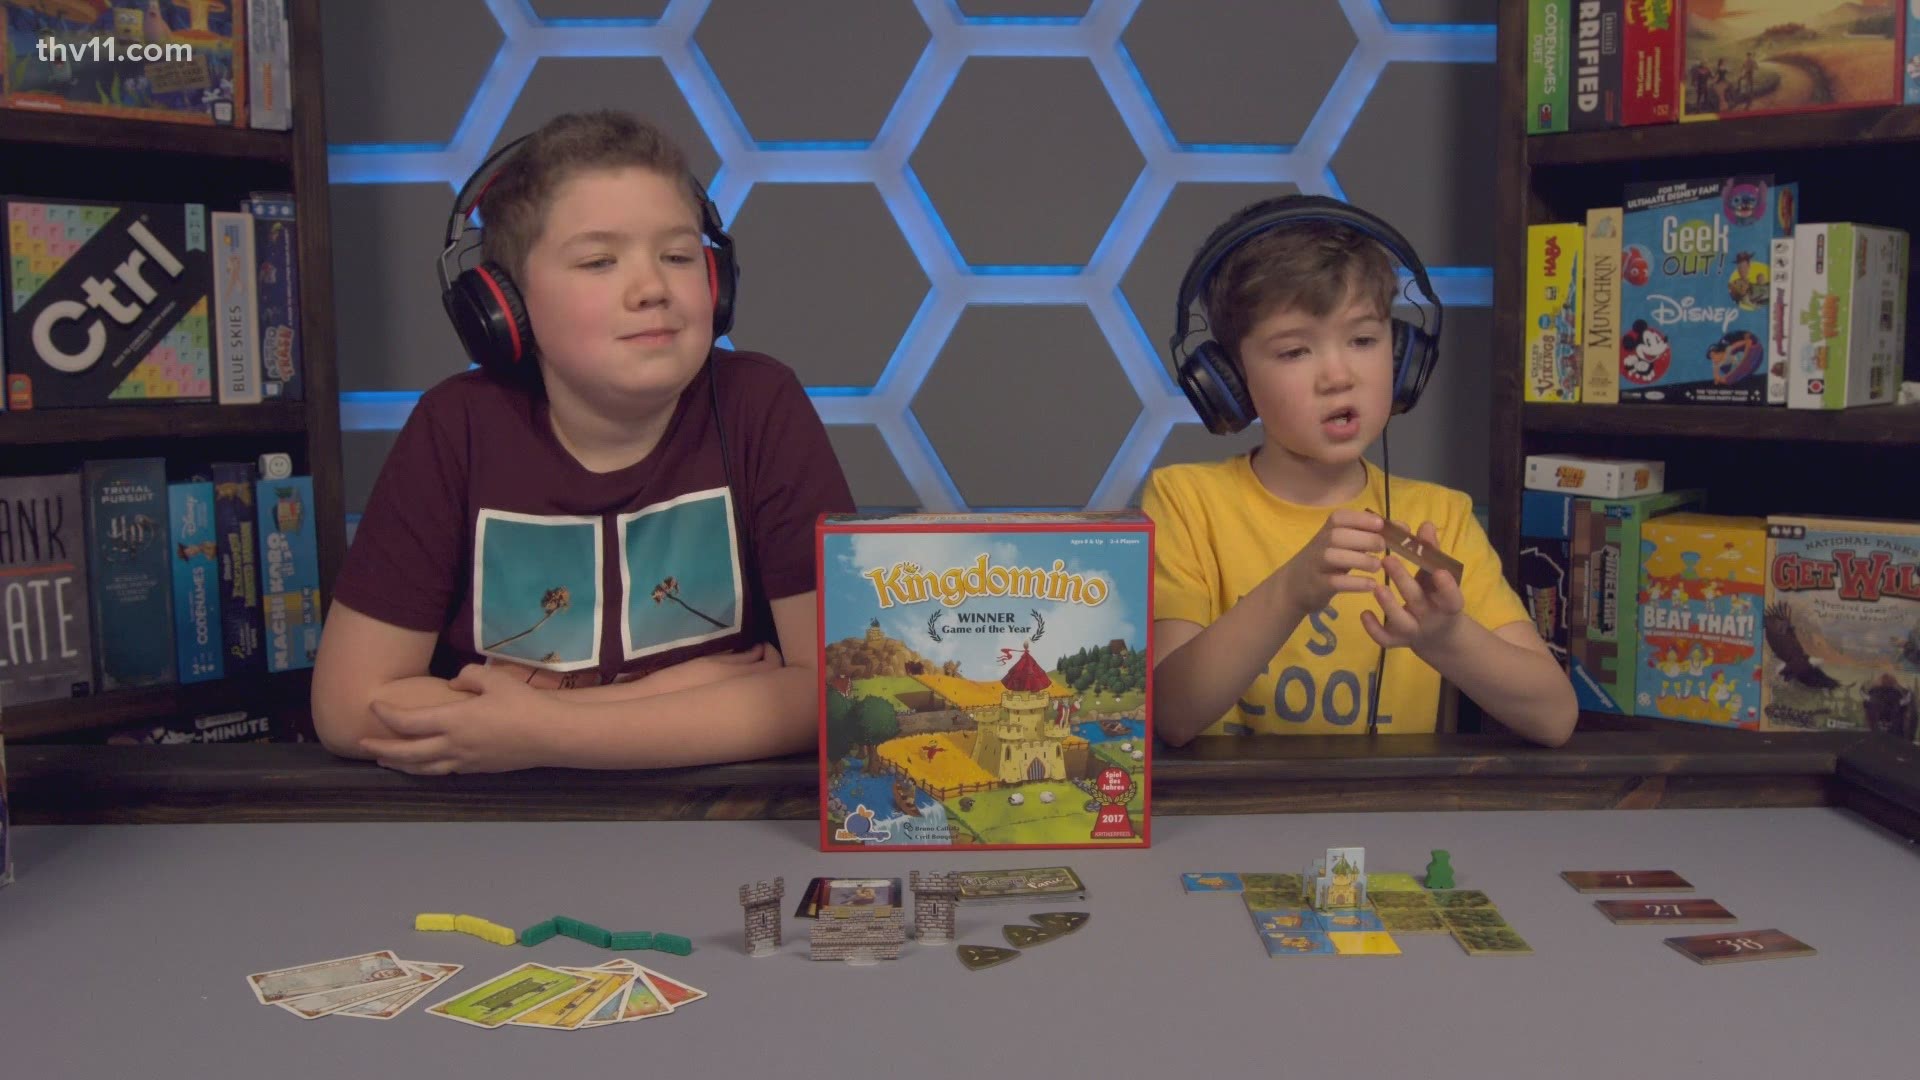 Jarred and Peyton with 'Kidsplaining' share a few board games that they recommend if you are just getting started.